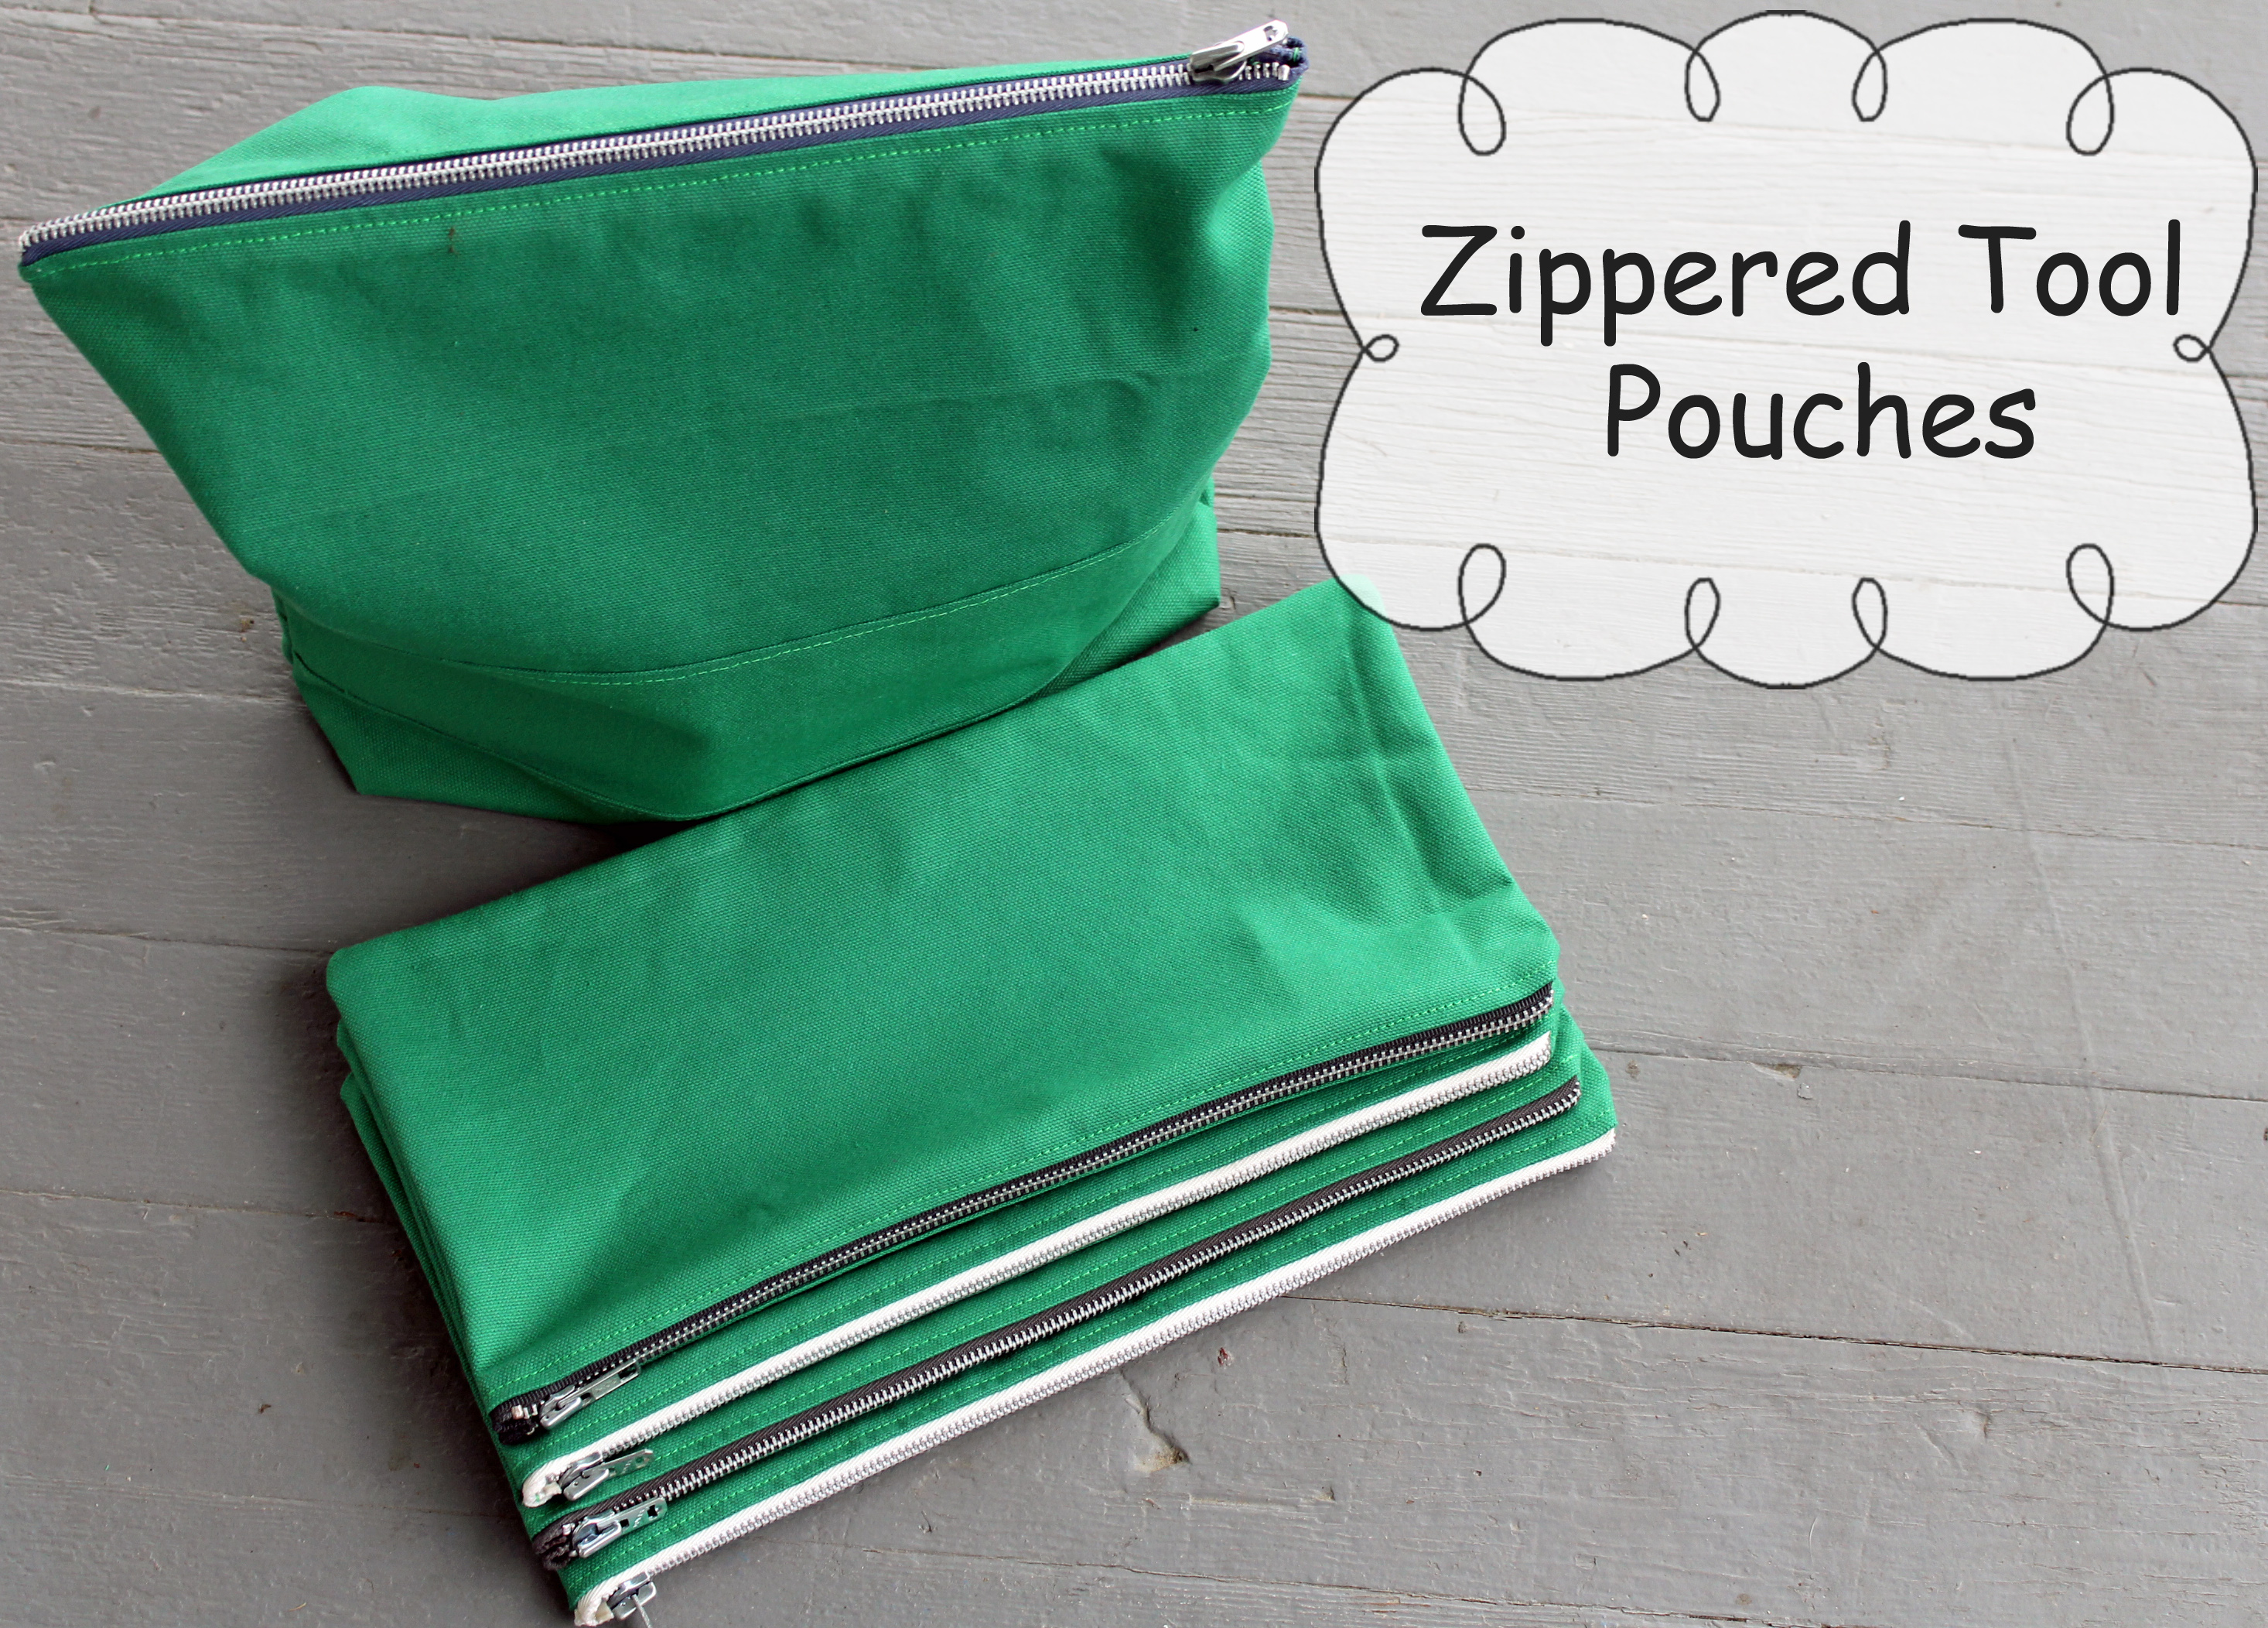 Zippered Tool Pouches